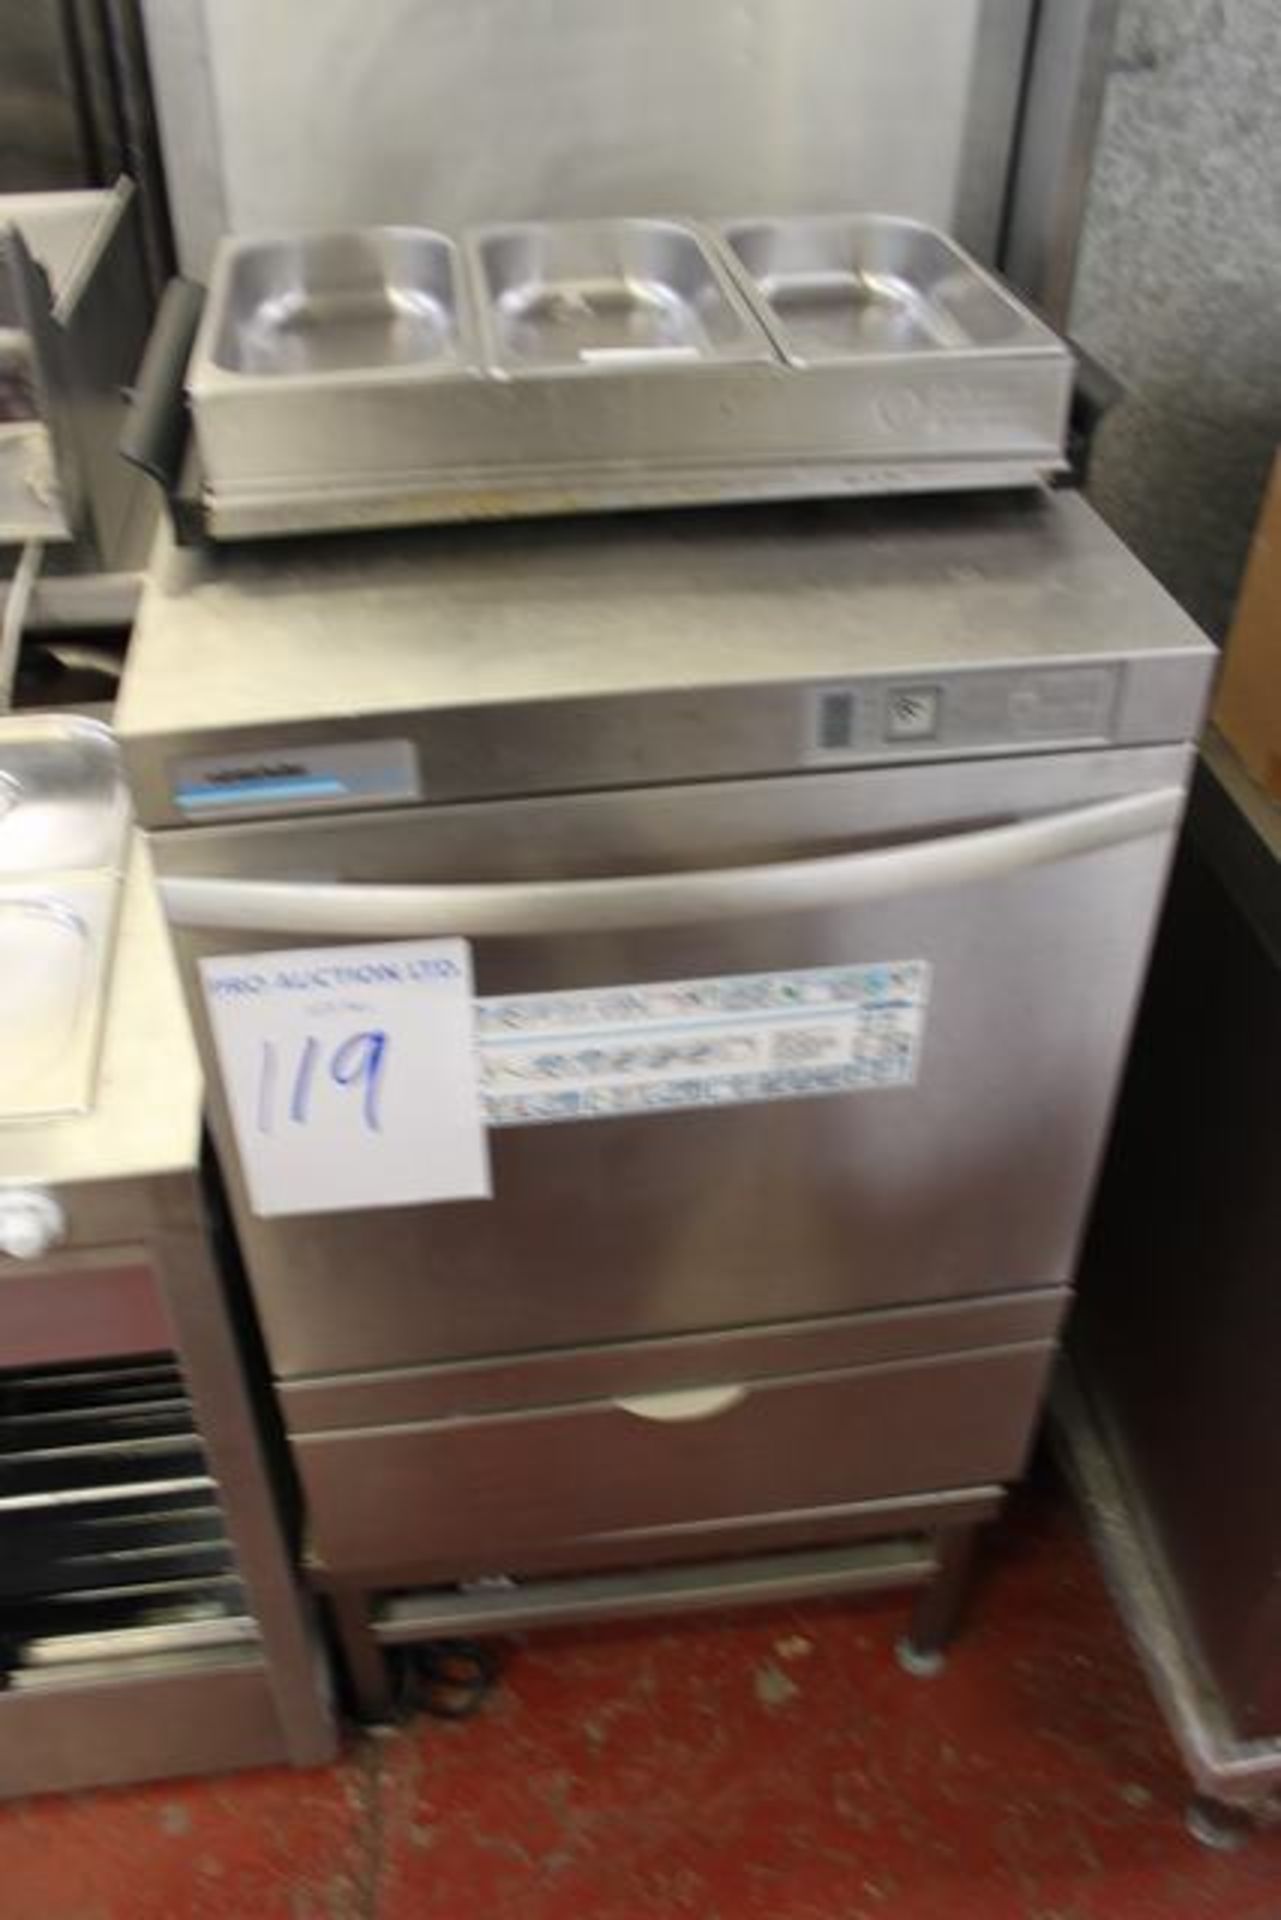 Winterhalter  GS302 under counter glass washer 3, 4  and 5 min wash cycles 500mm x 500mm basket